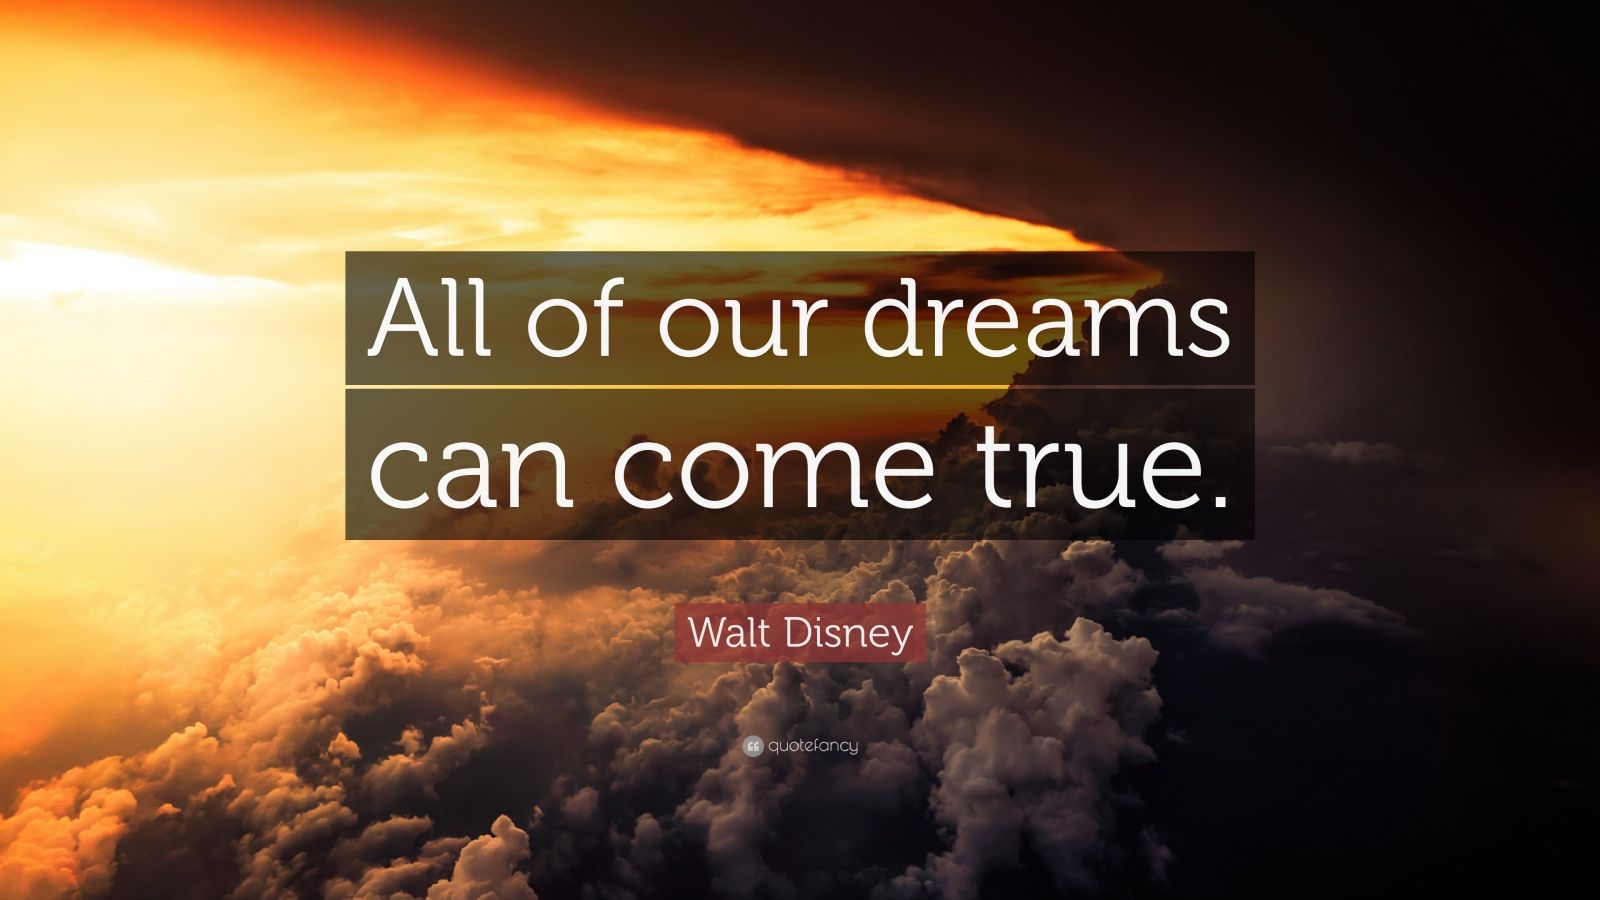 Walt Disney Quote: “All of our dreams can come true.” (23 wallpapers